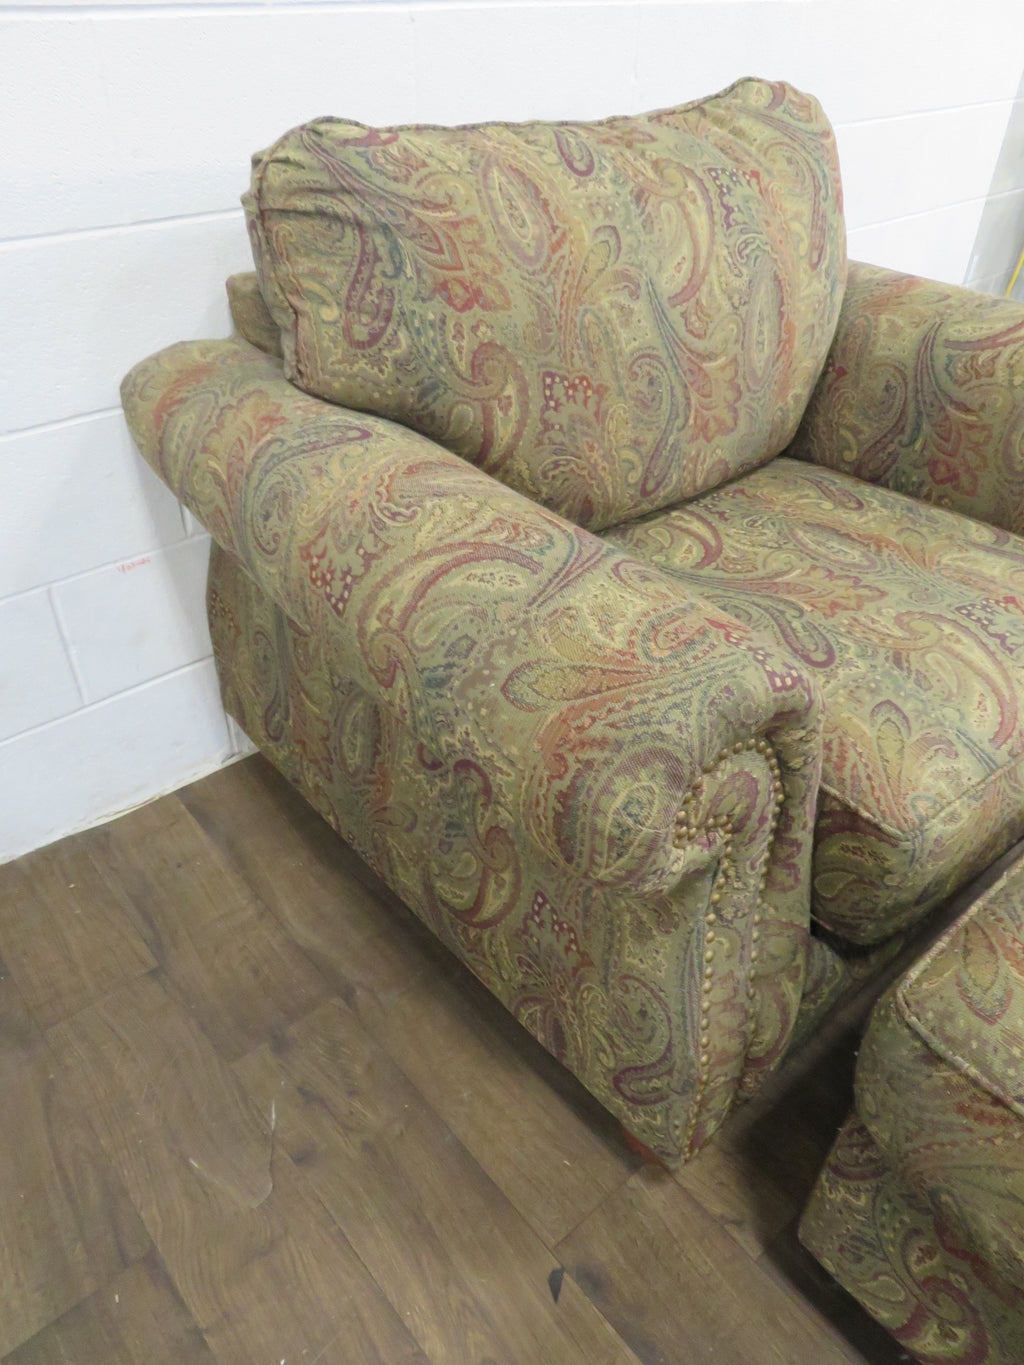 Paisley Patterned Arm Chair and Ottoman